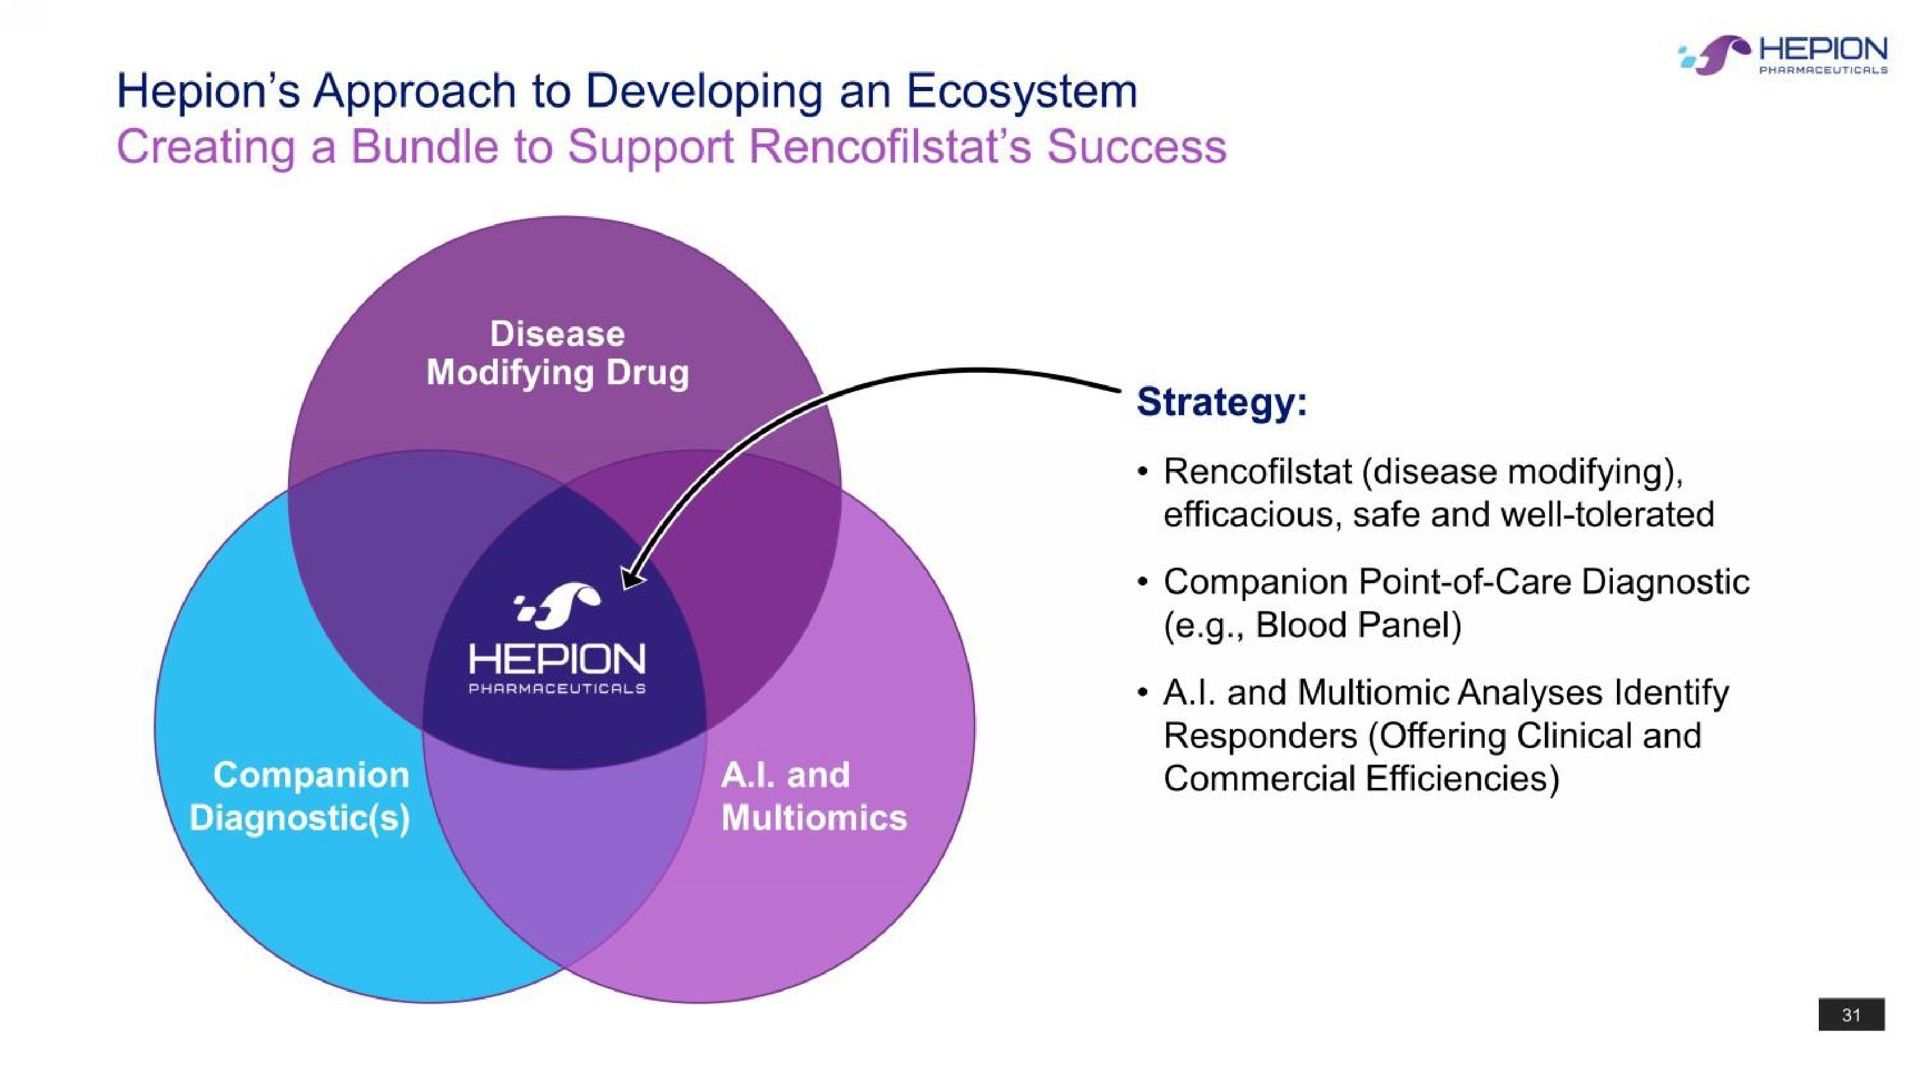 approach to developing an ecosystem creating a bundle to support success strategy | Hepion Pharmaceuticals